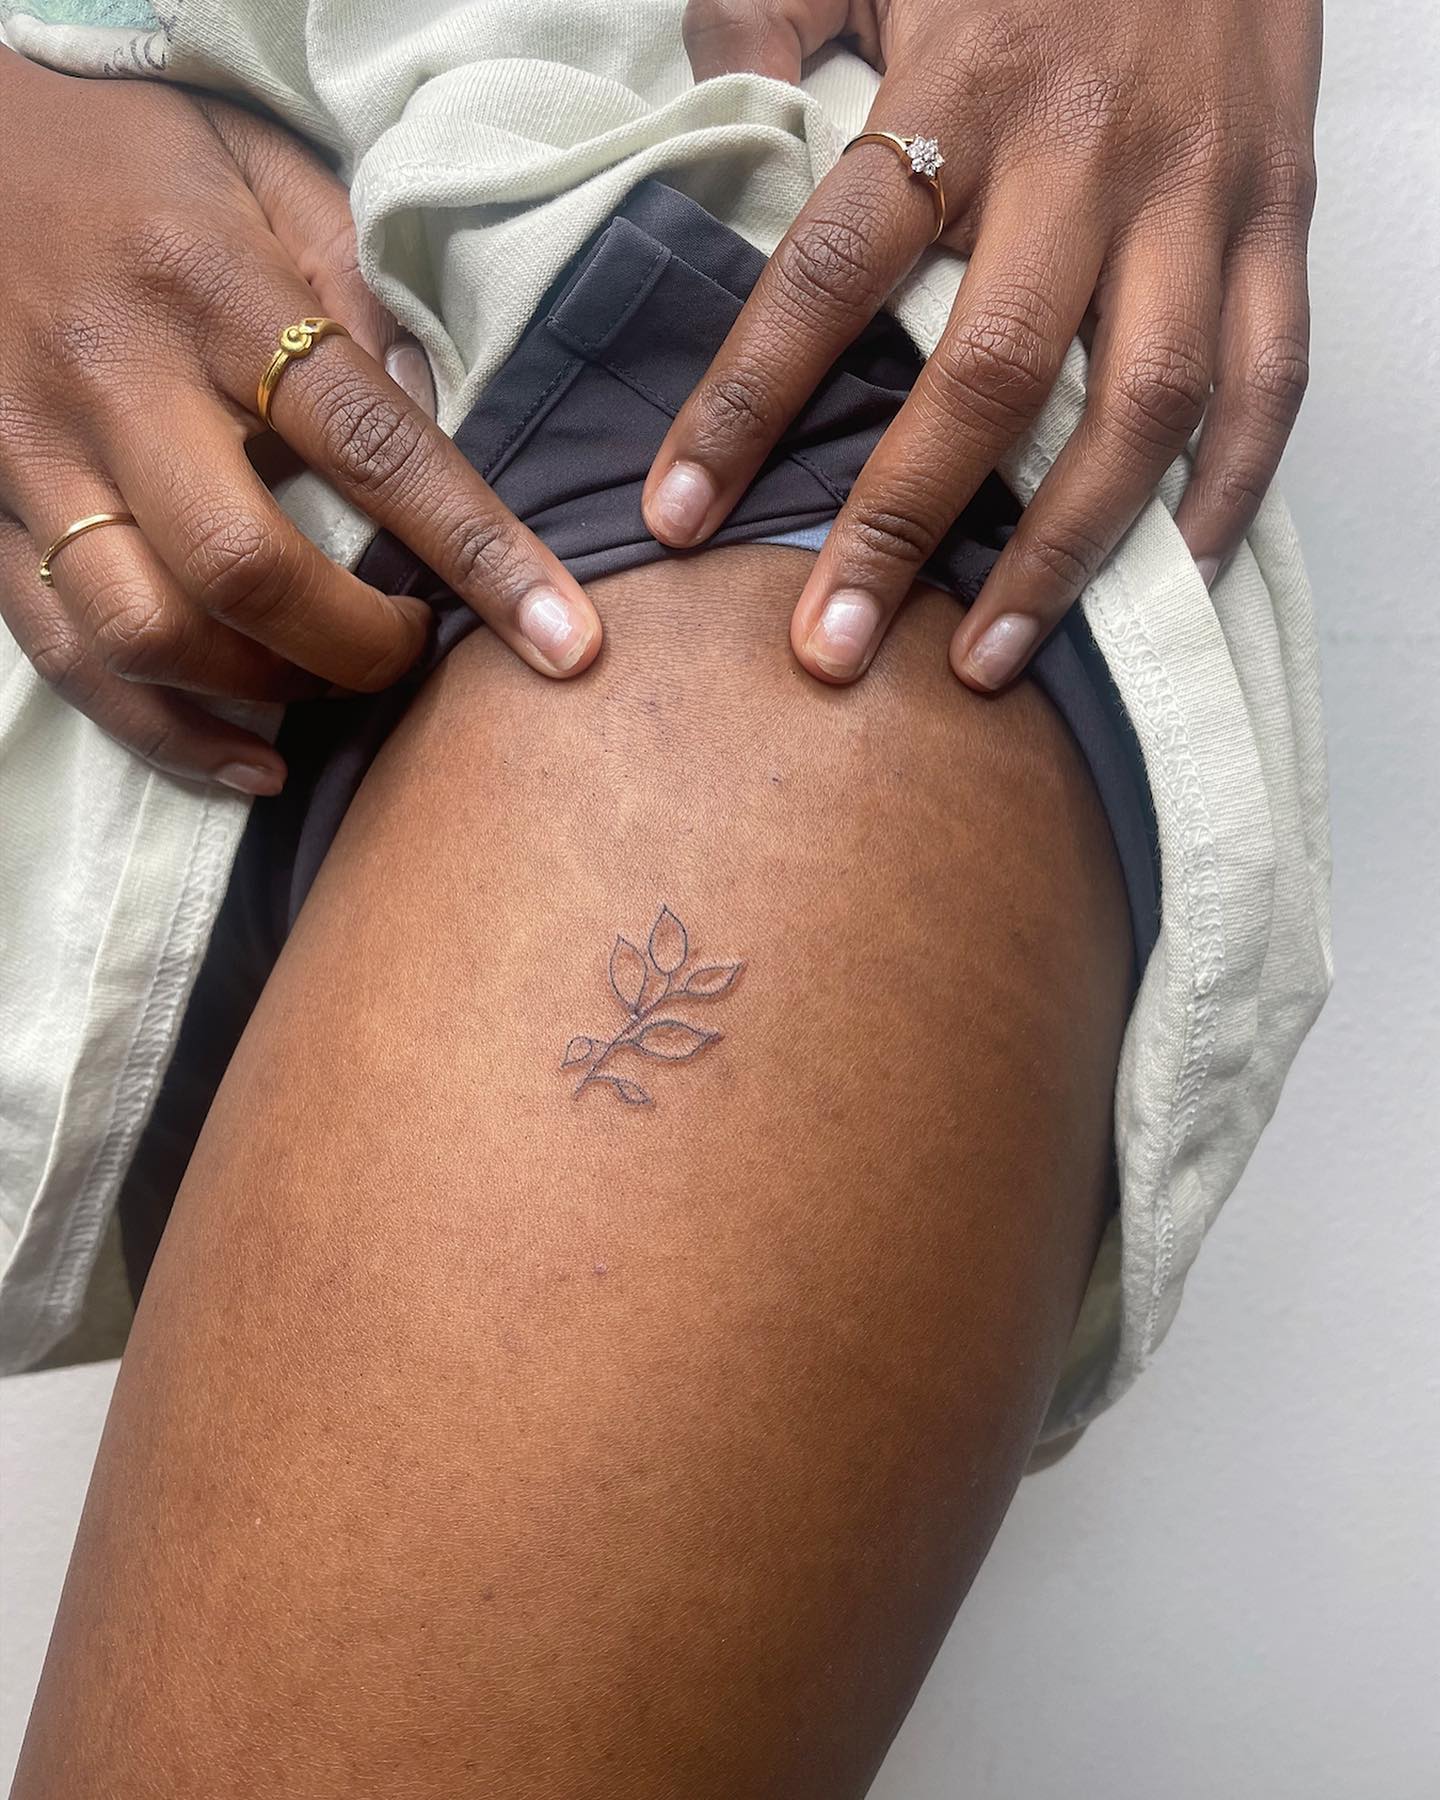 Why don’t you make your upper leg shine out with this tattoo? Super-small leaf tattoo is enough to look perfect since minimalist tattoos are also super cool.